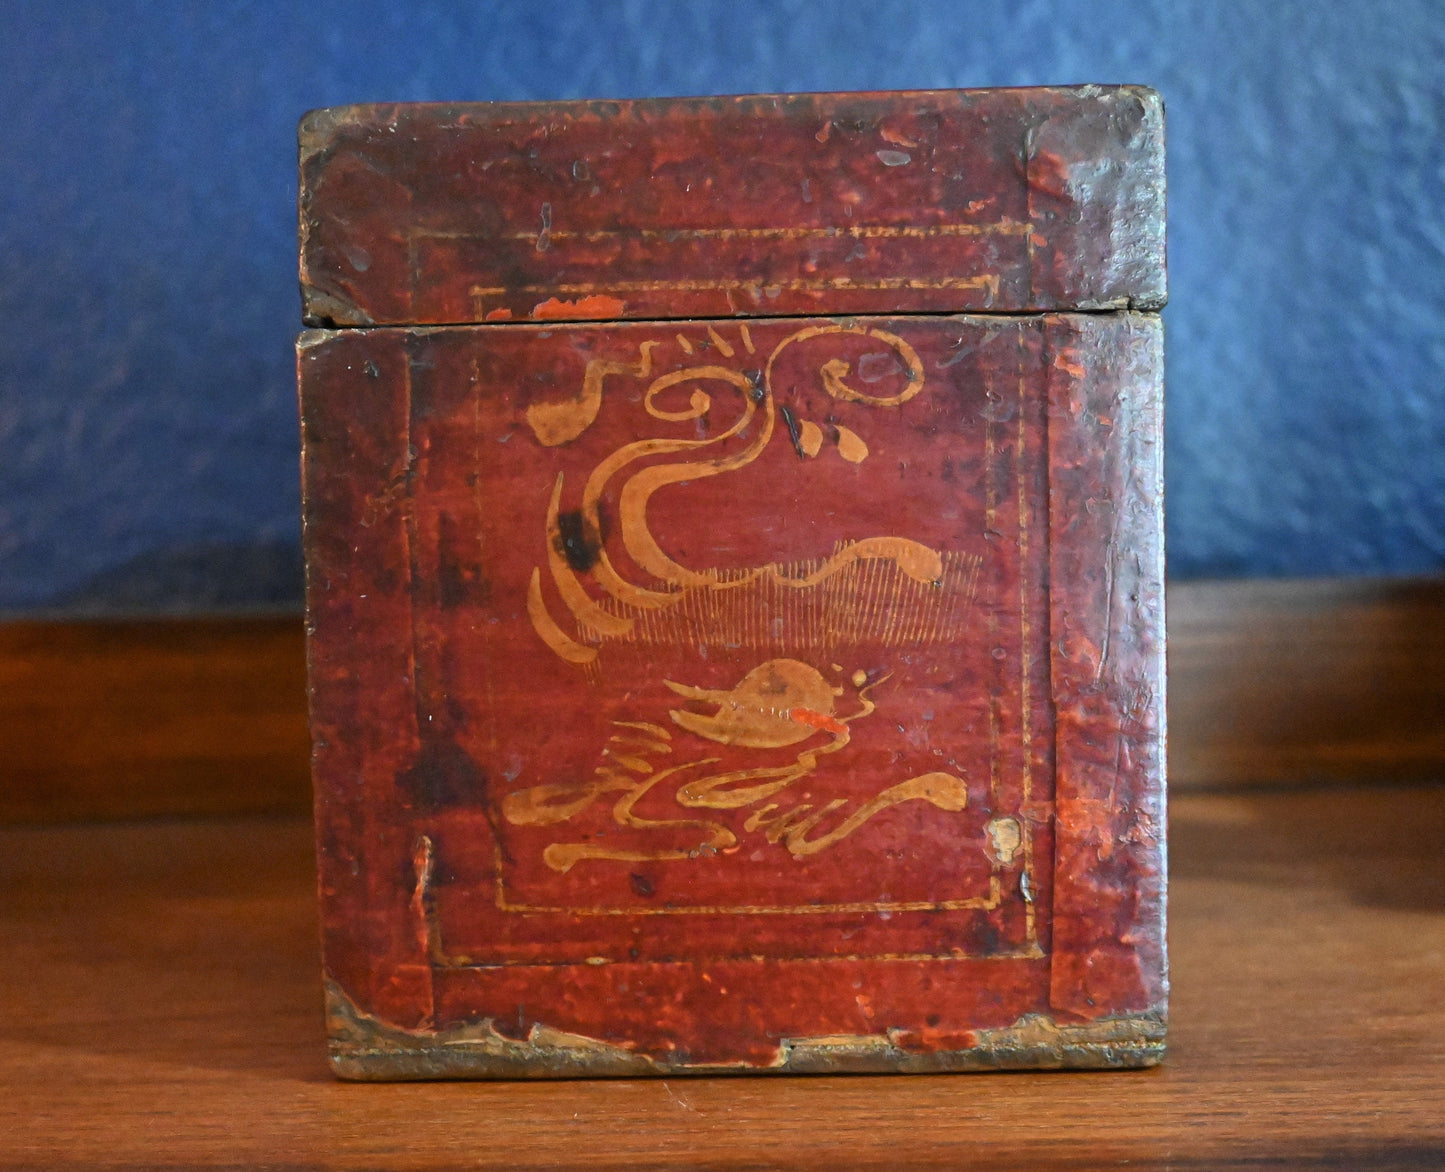 Stunning Antique Chinese Red & Gold Lacquer Wooden Box Hand-Painted Qing Dynasty circa 1875-1908